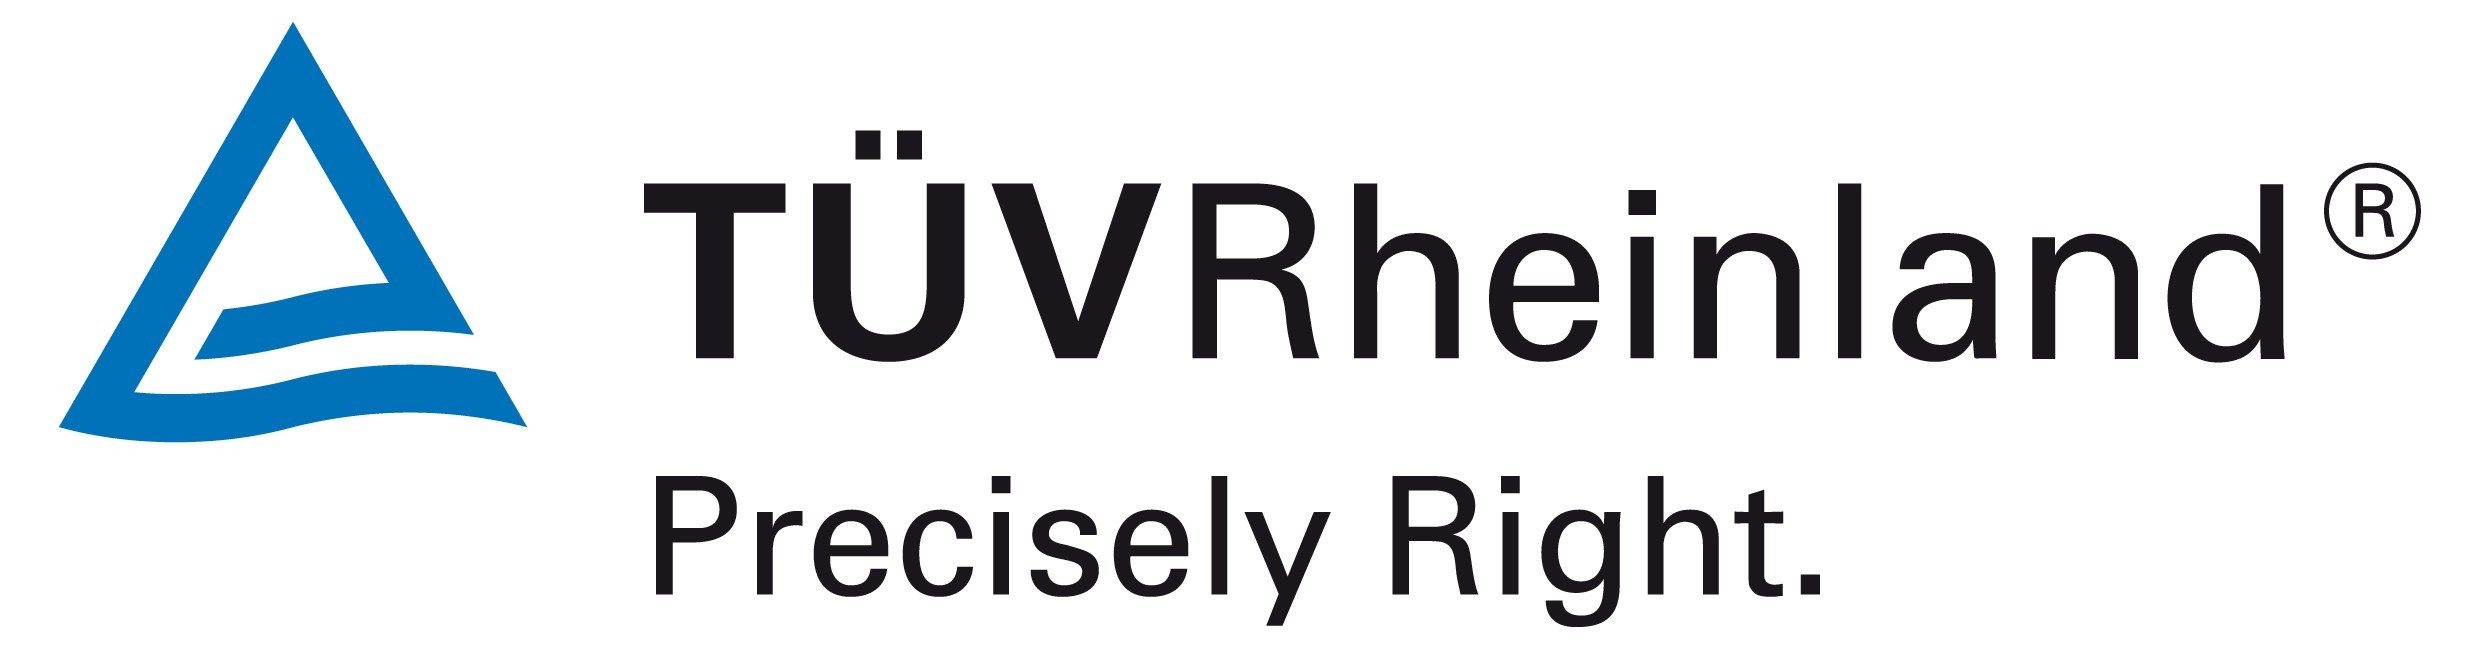 TUV Rheinland - TÜV Rheinland is a global leader in independent inspection services, founded 145 years ago. The grou